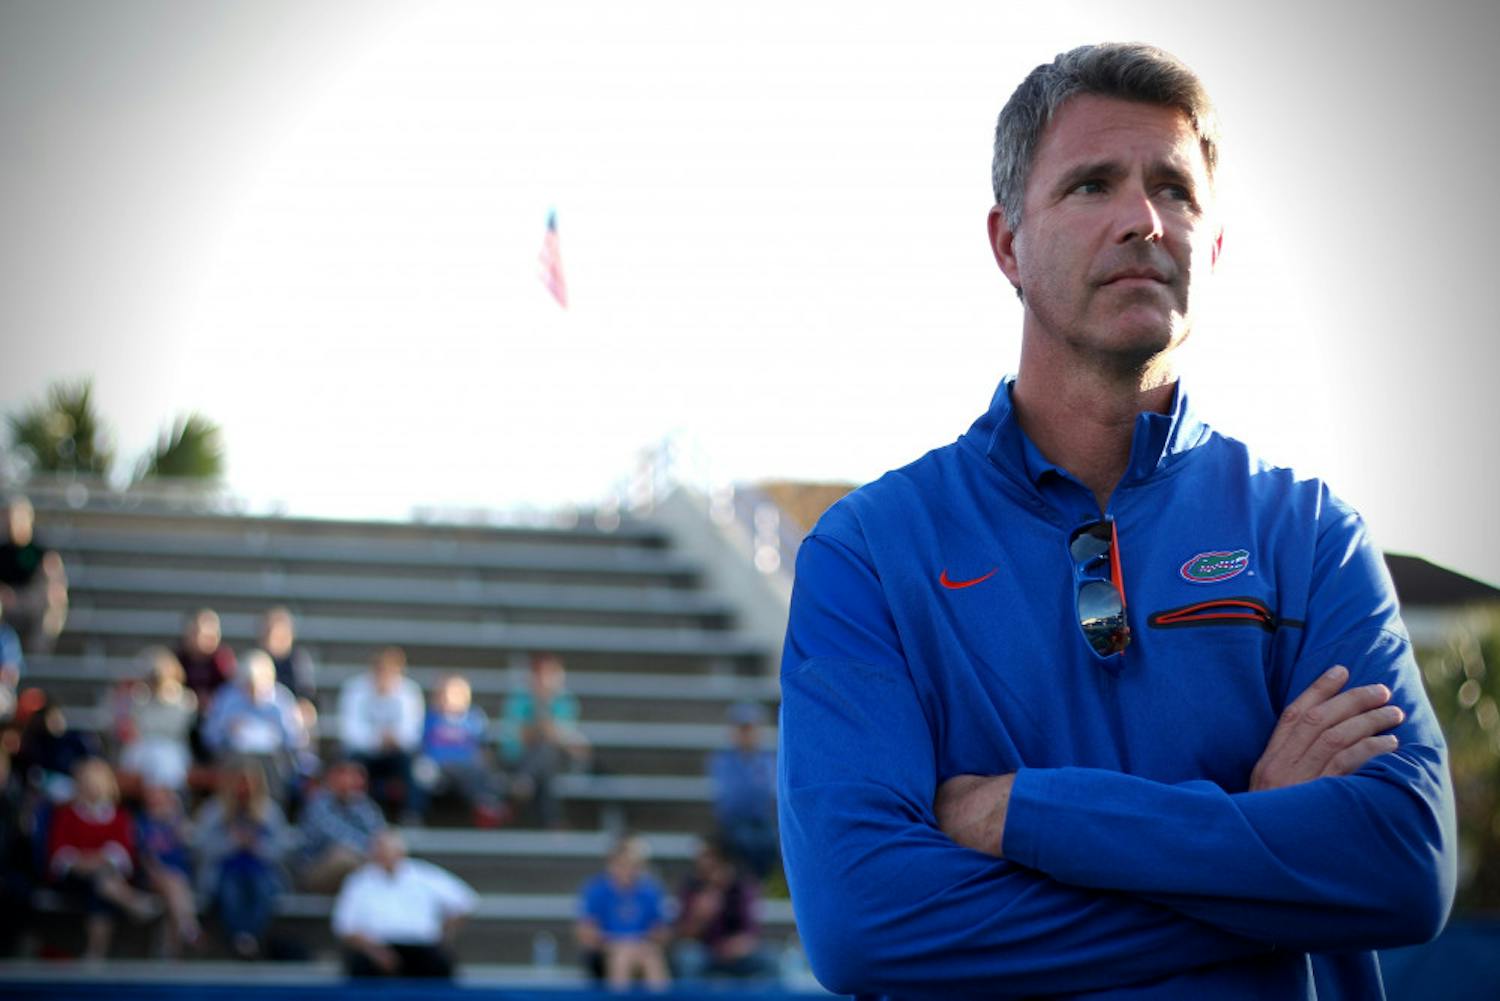 Coach Roland Thornqvist said the freshmen starting for the No. 3 Gators will gain experience by playing both No. 18 Oklahoma State tonight as well as in the ITA National Team Indoor Championships starting Friday.